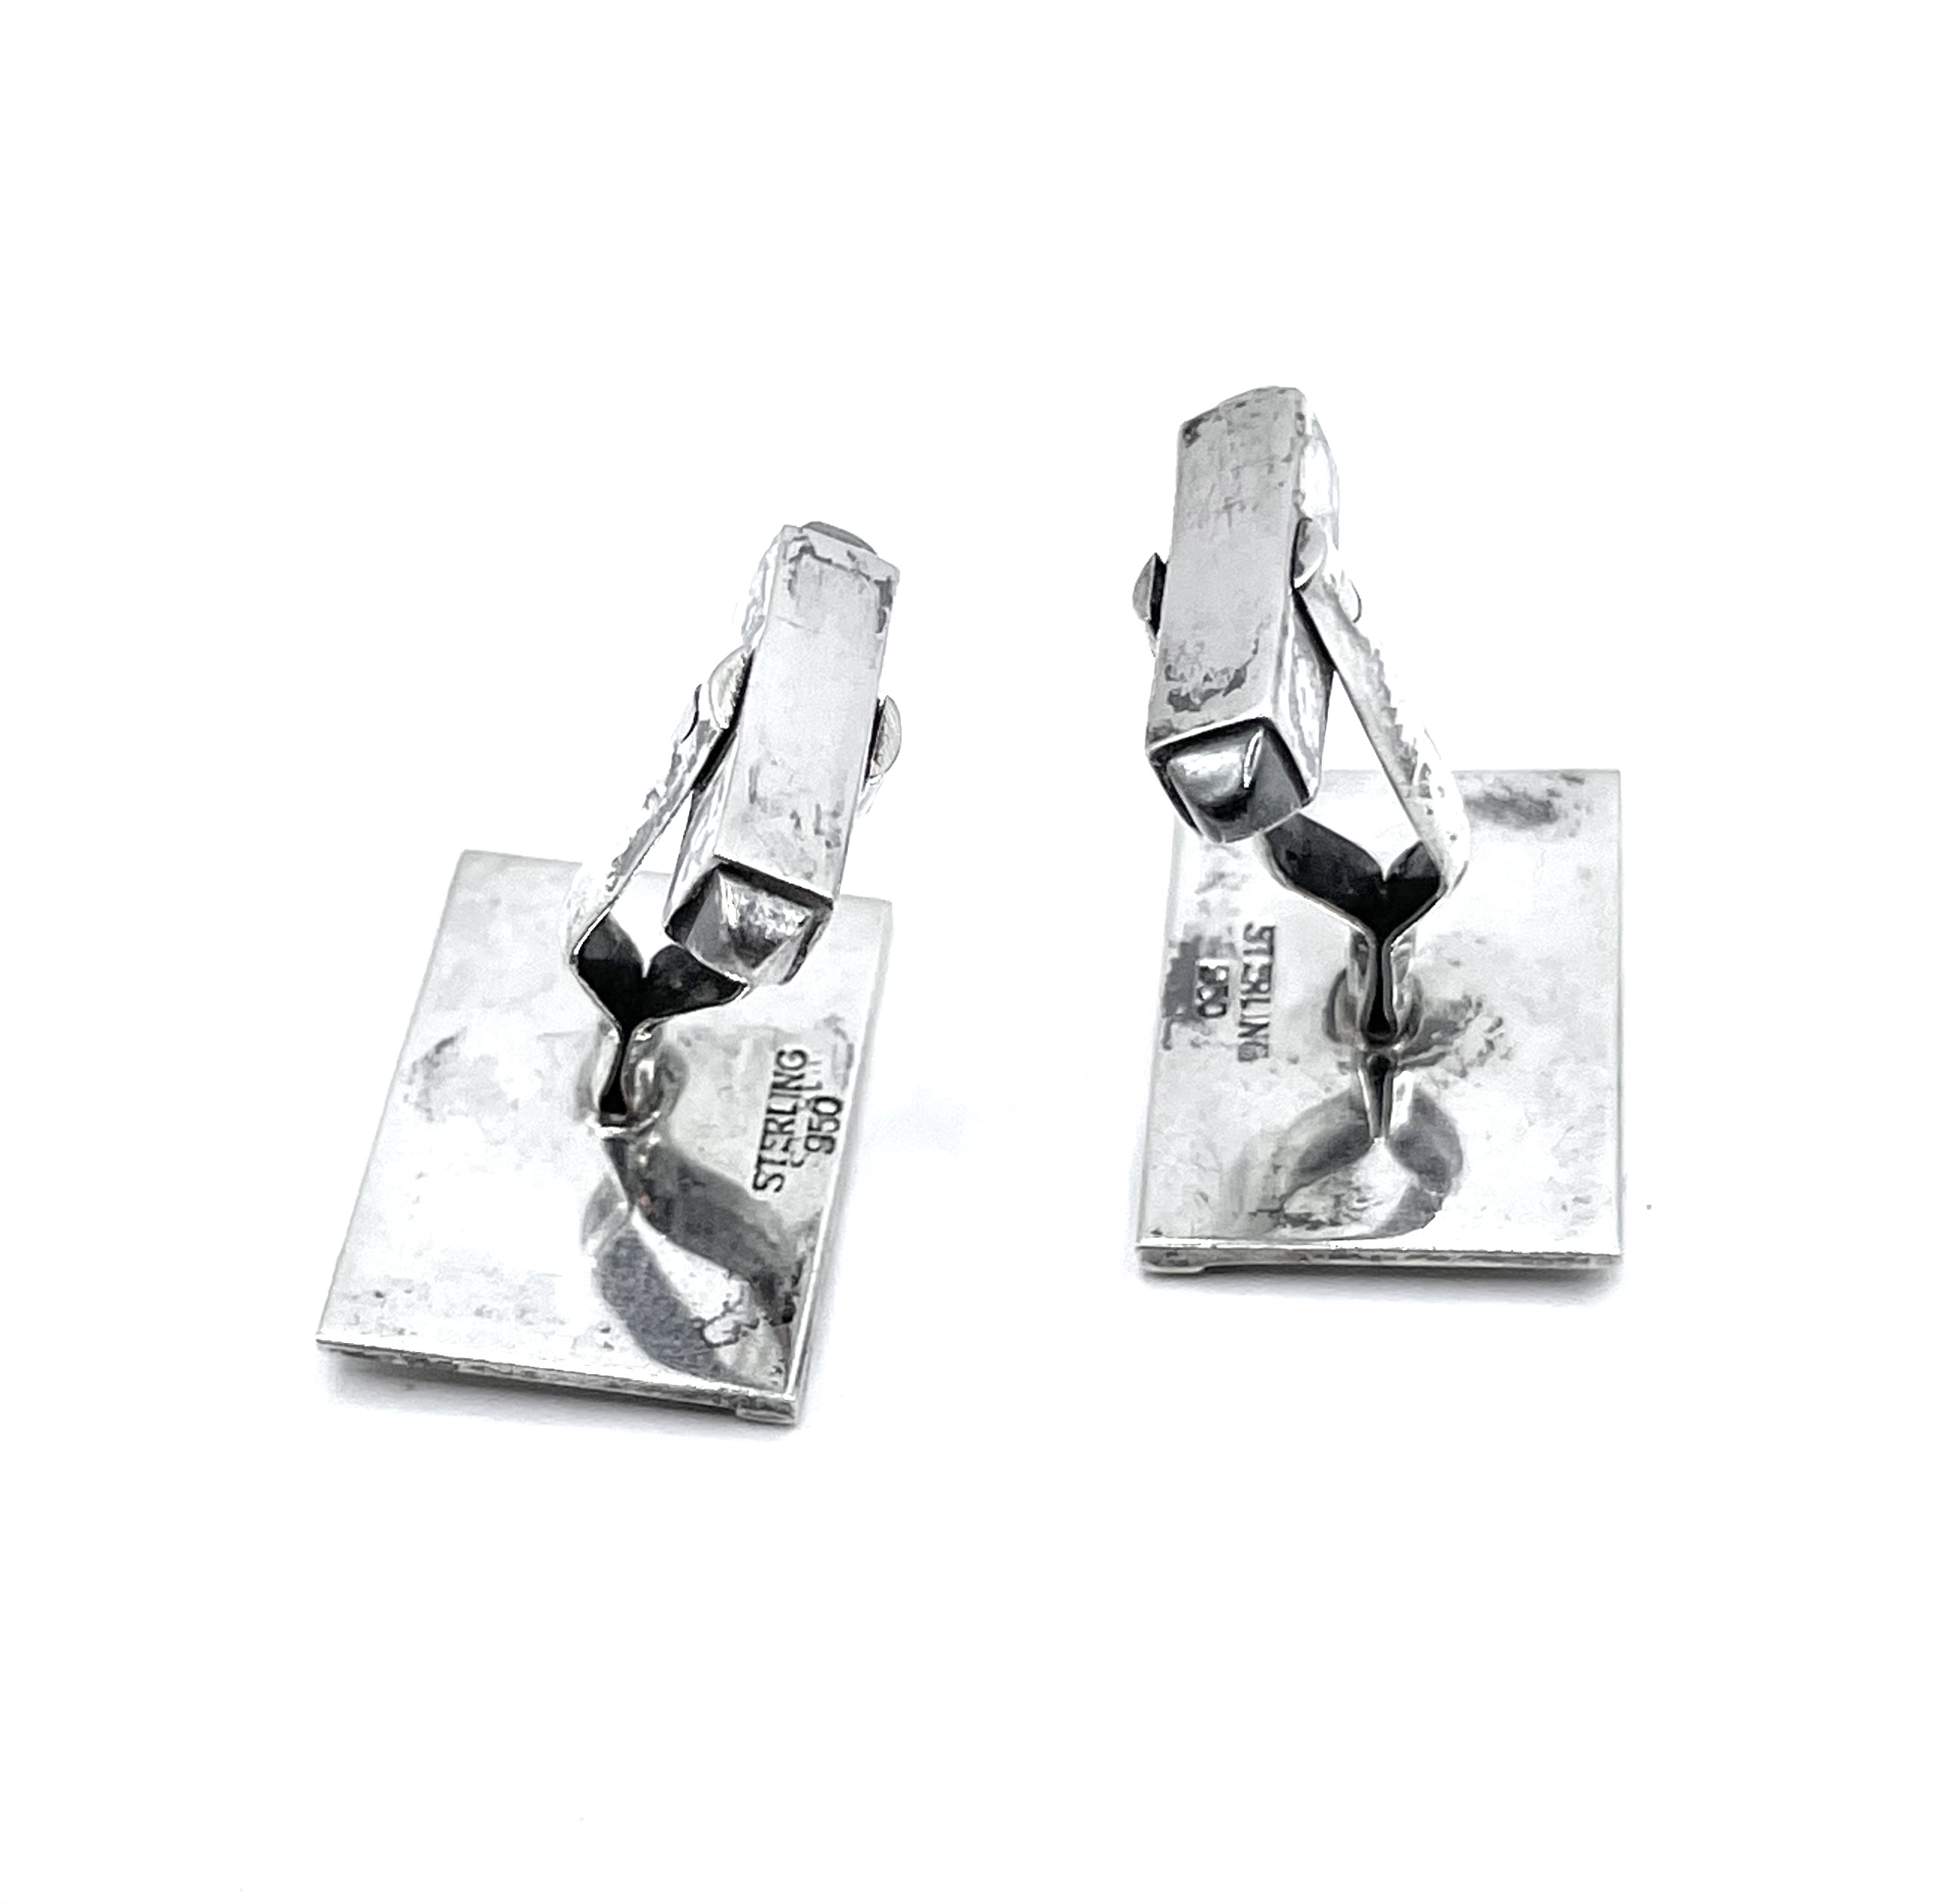 1950's Japanese silver cuff links